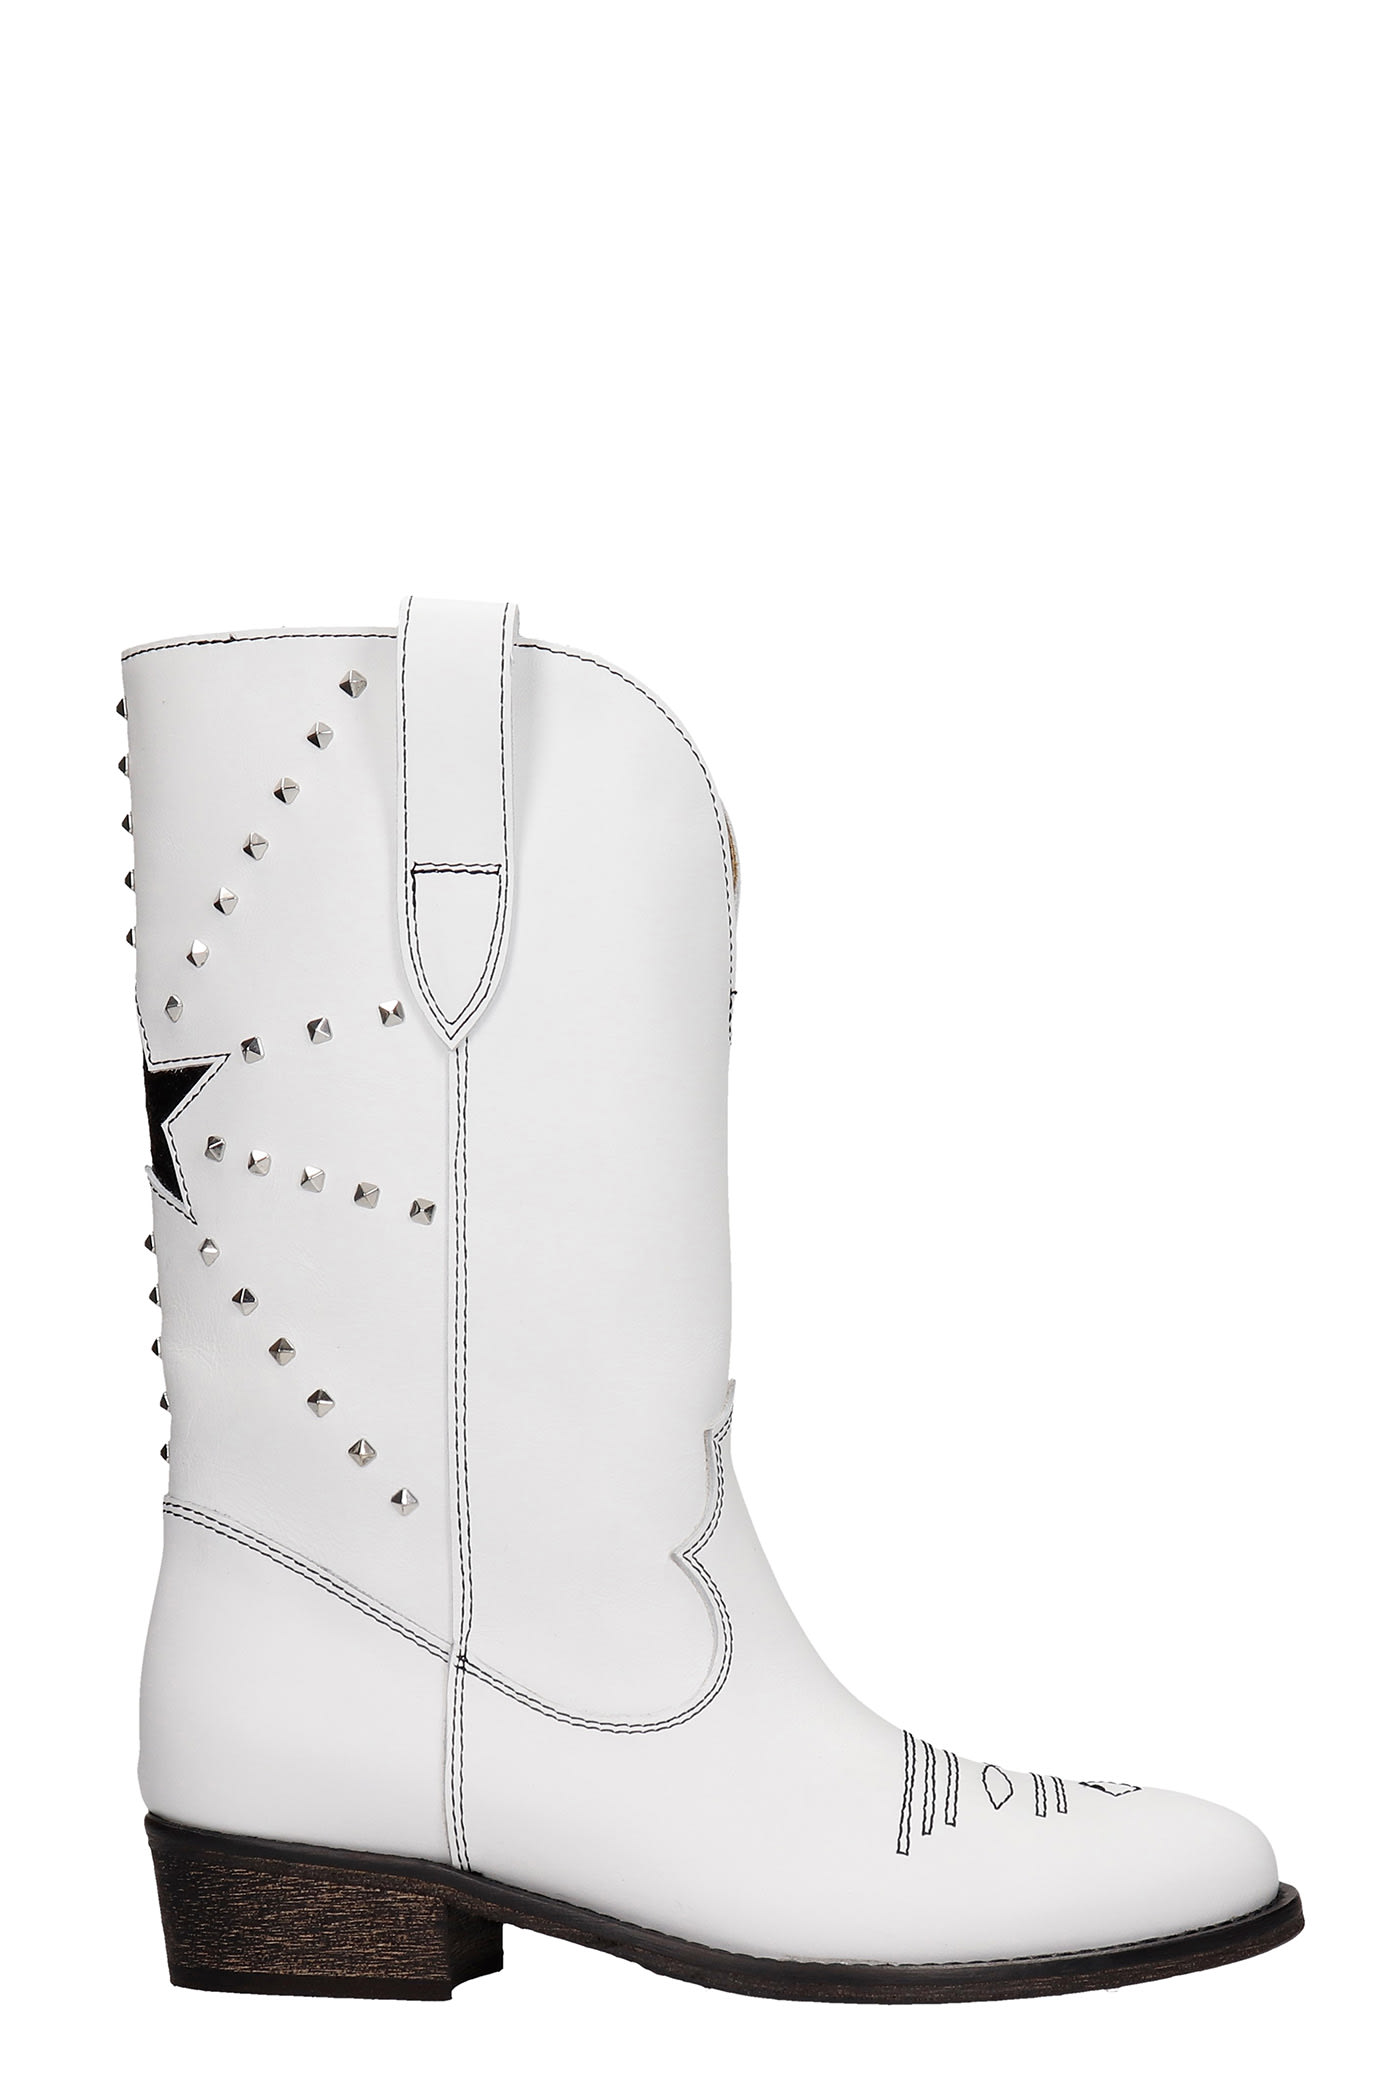 VIA ROMA 15 TEXAN BOOTS IN WHITE LEATHER,3323